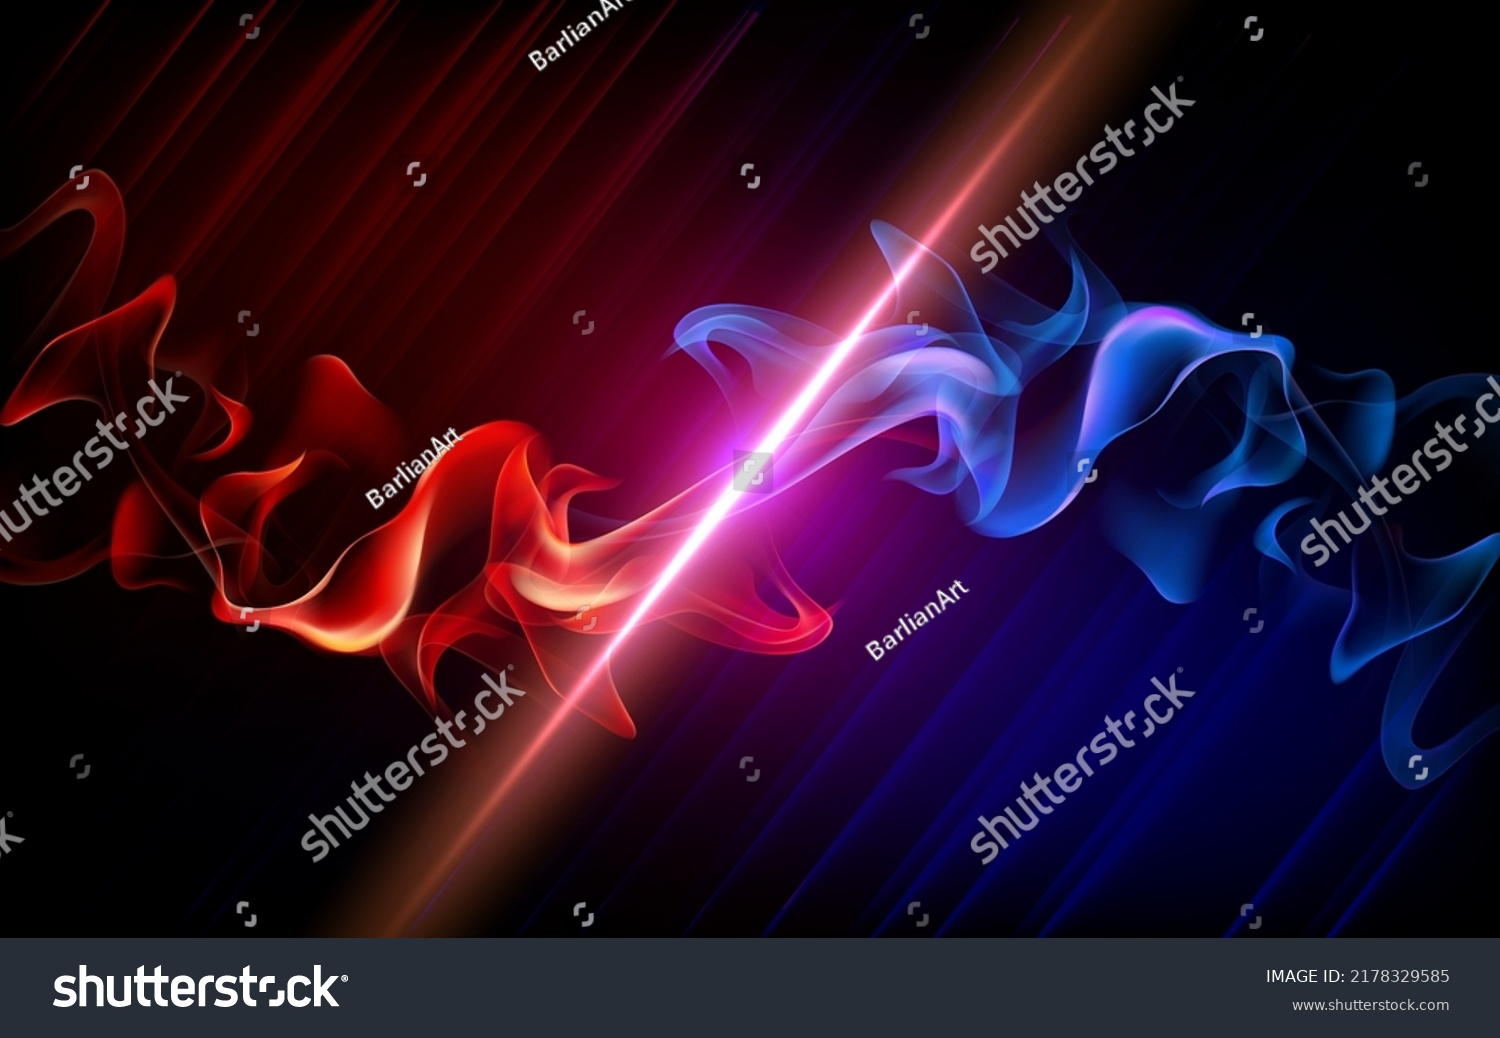 SVG of Fire collision red and blue background, versus banner. Powerful colored fire and the flash from the collision. Confrontation concept, competition vs match game. Battle game background. Versus Vector. svg